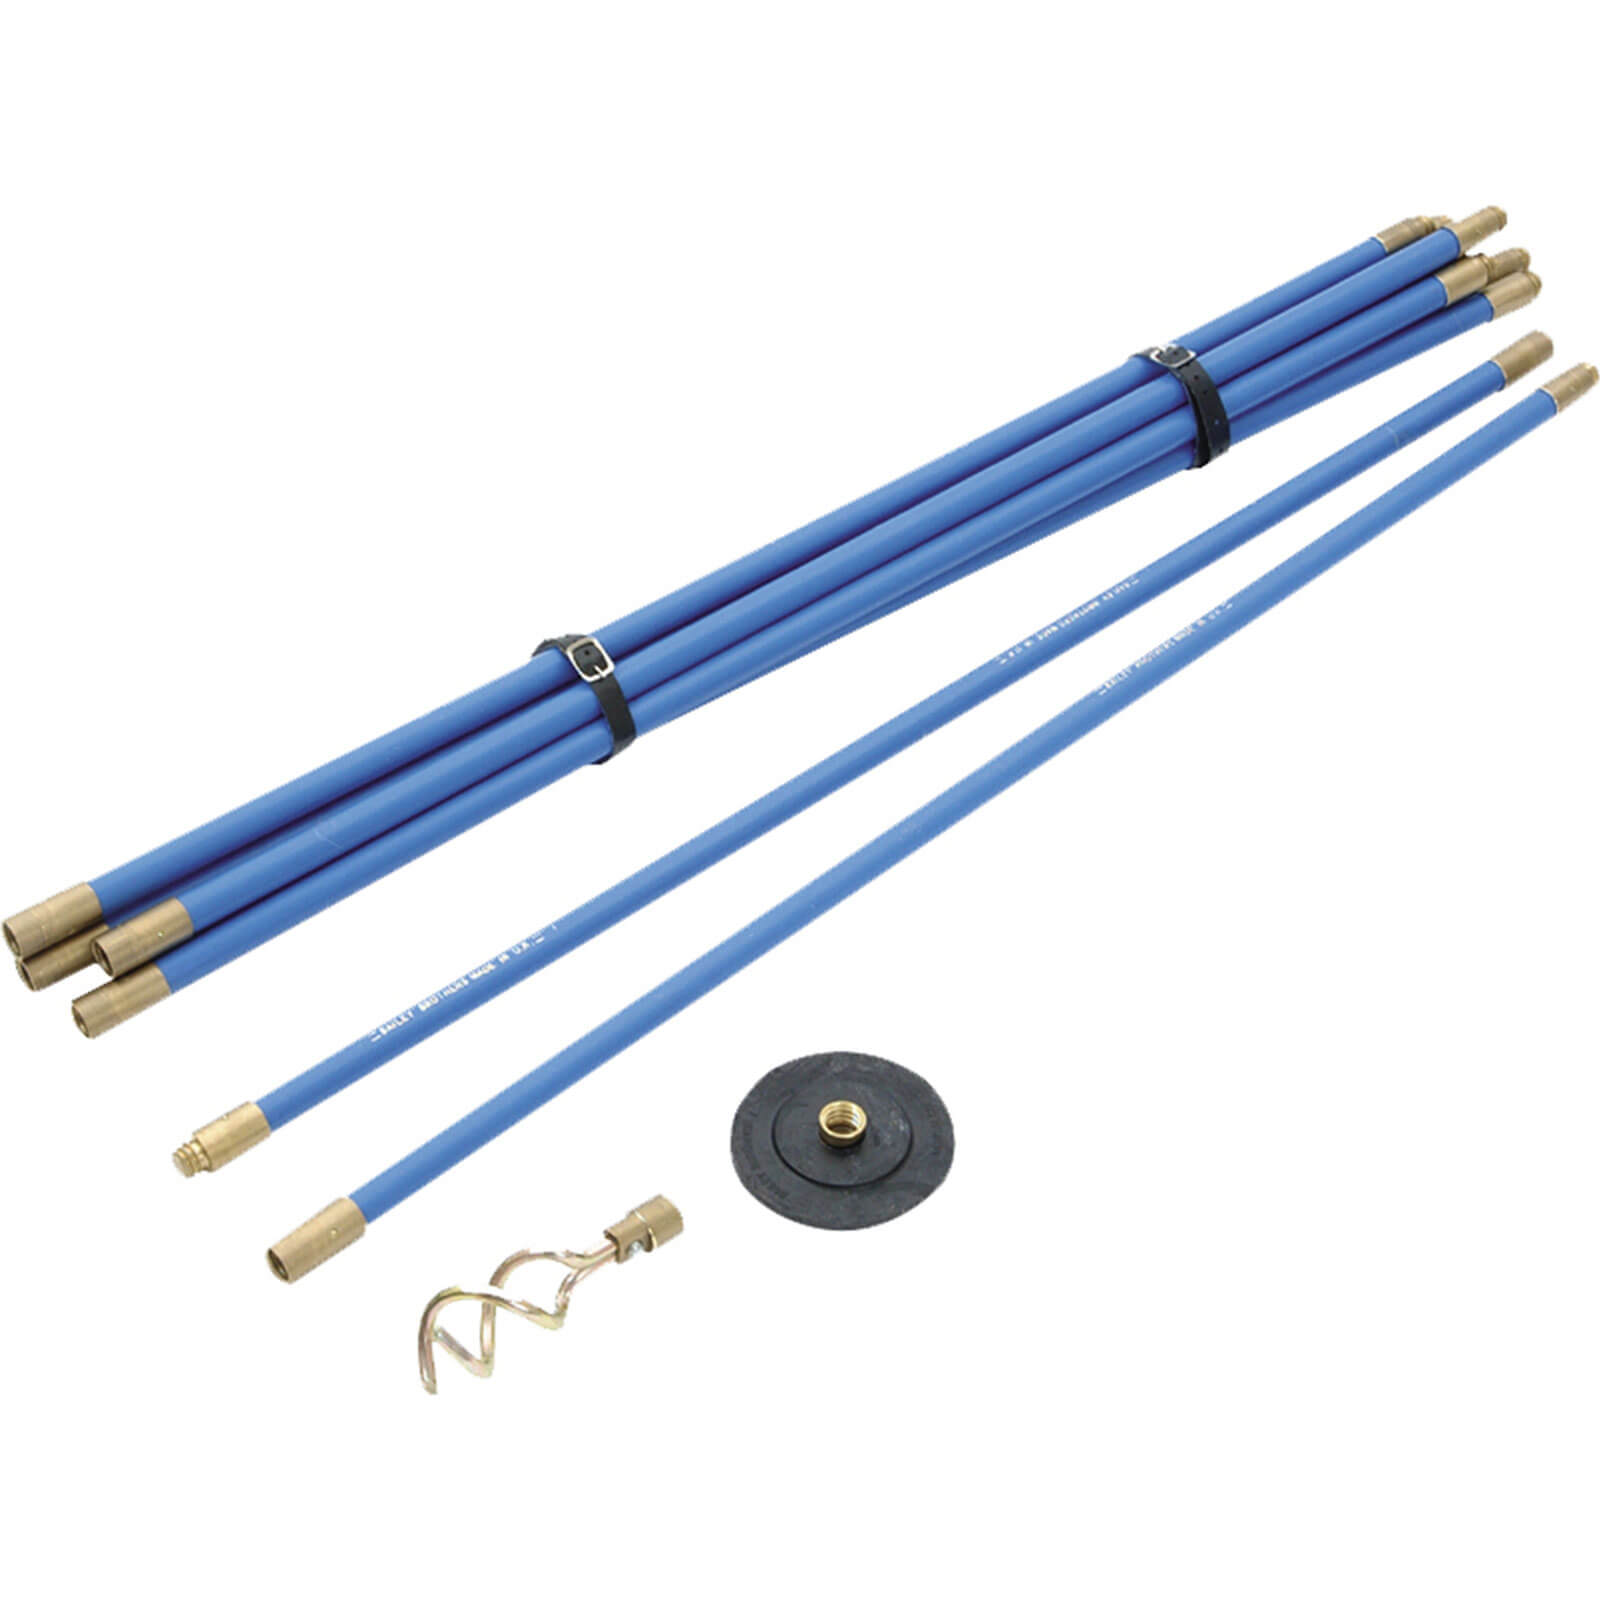 Image of Bailey 2 Piece Universal 3/4" Drain Rod Cleaning Set